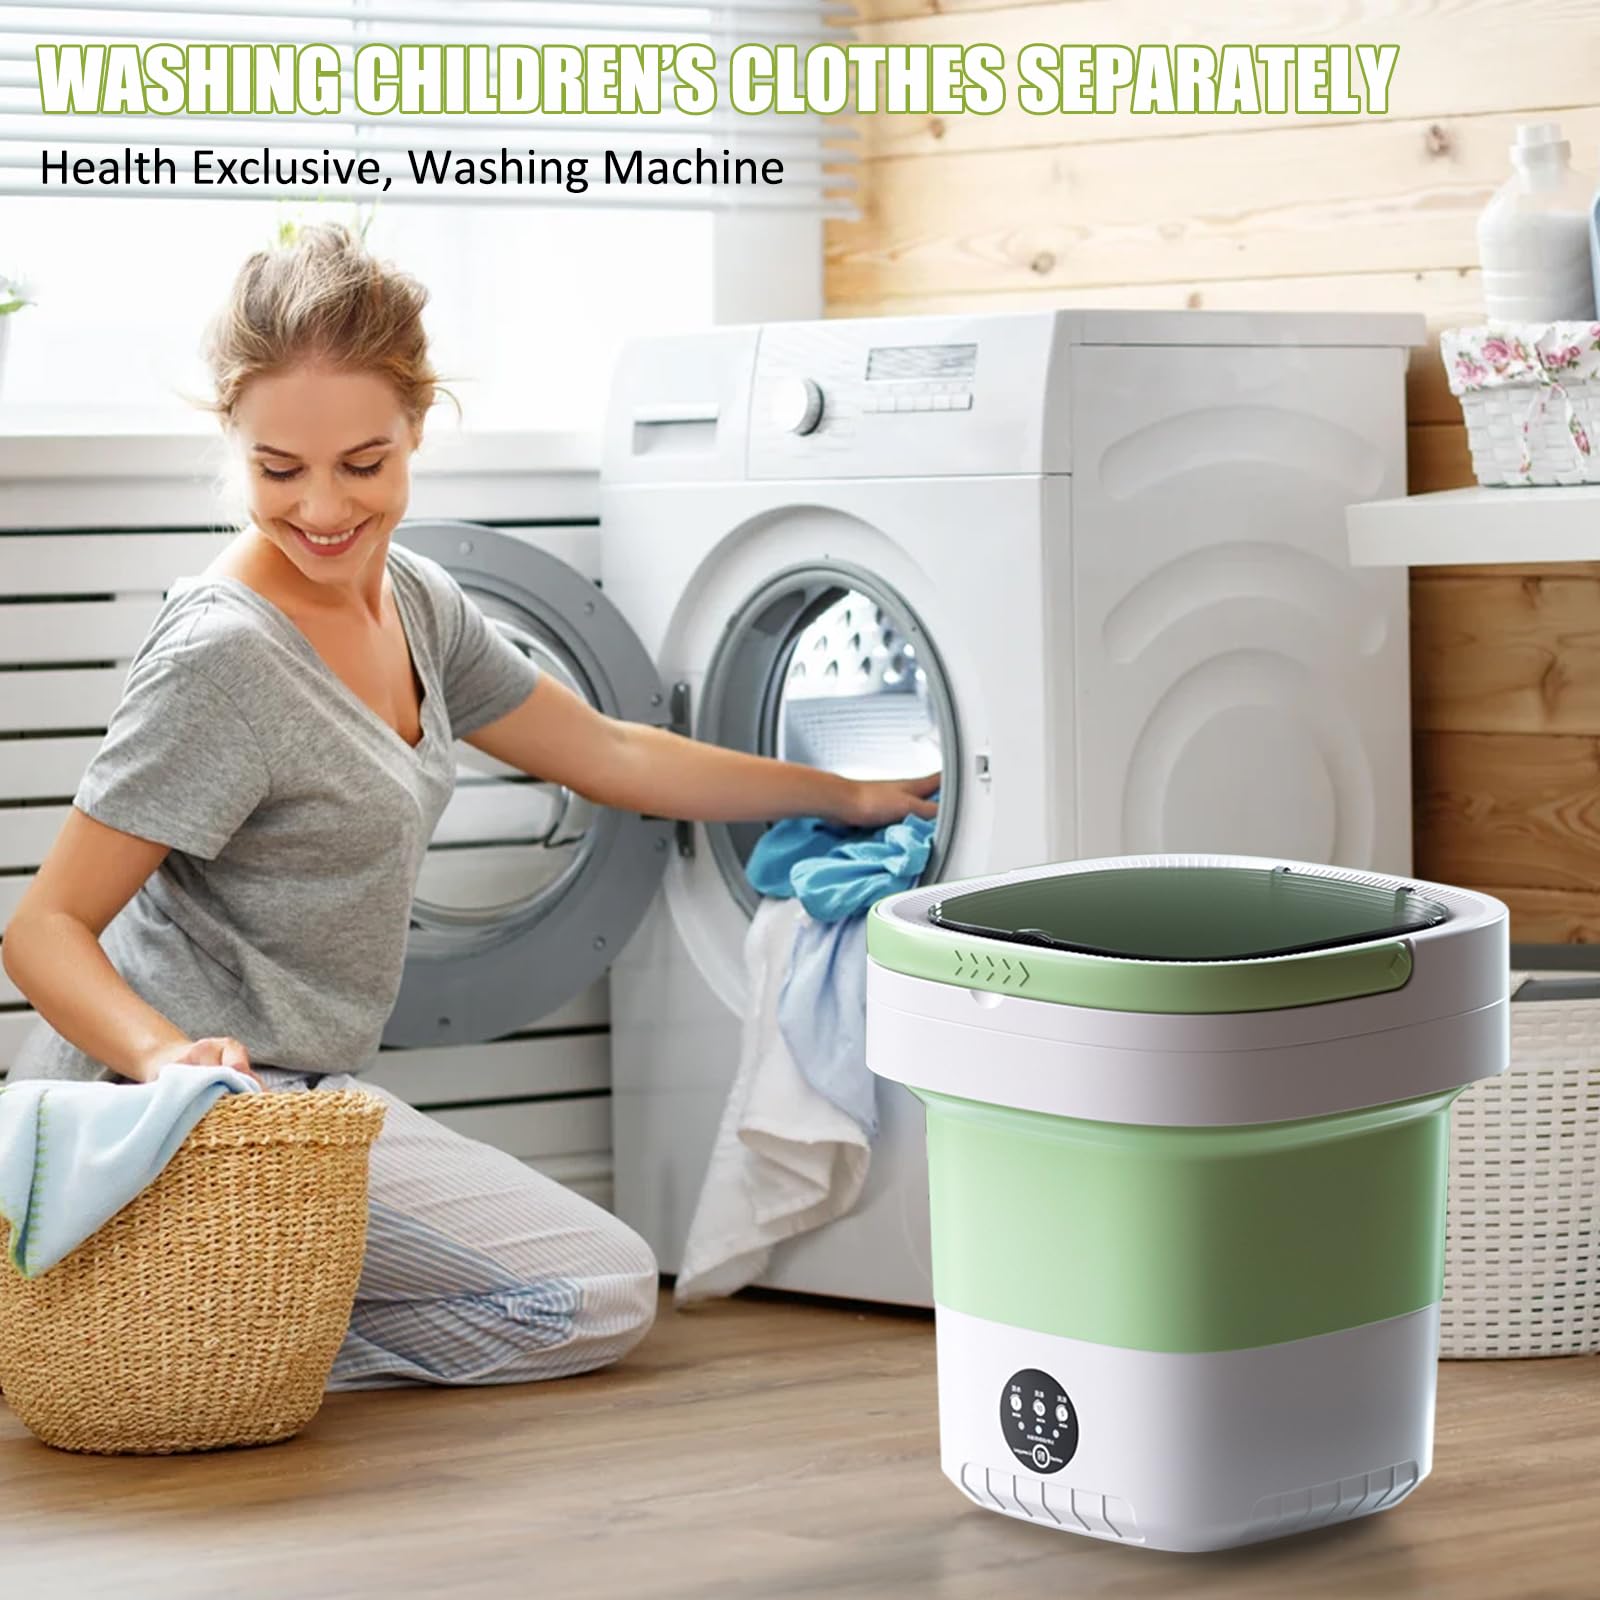 Portable Washing Machine, 9l Large Capacity, Foldable Washing Machine Suitable For Washing Small Clothes, Baby Clothes, Underwear, Socks, Pet Supplies, Apartments, Camping, Rv Travel Laundry- Green